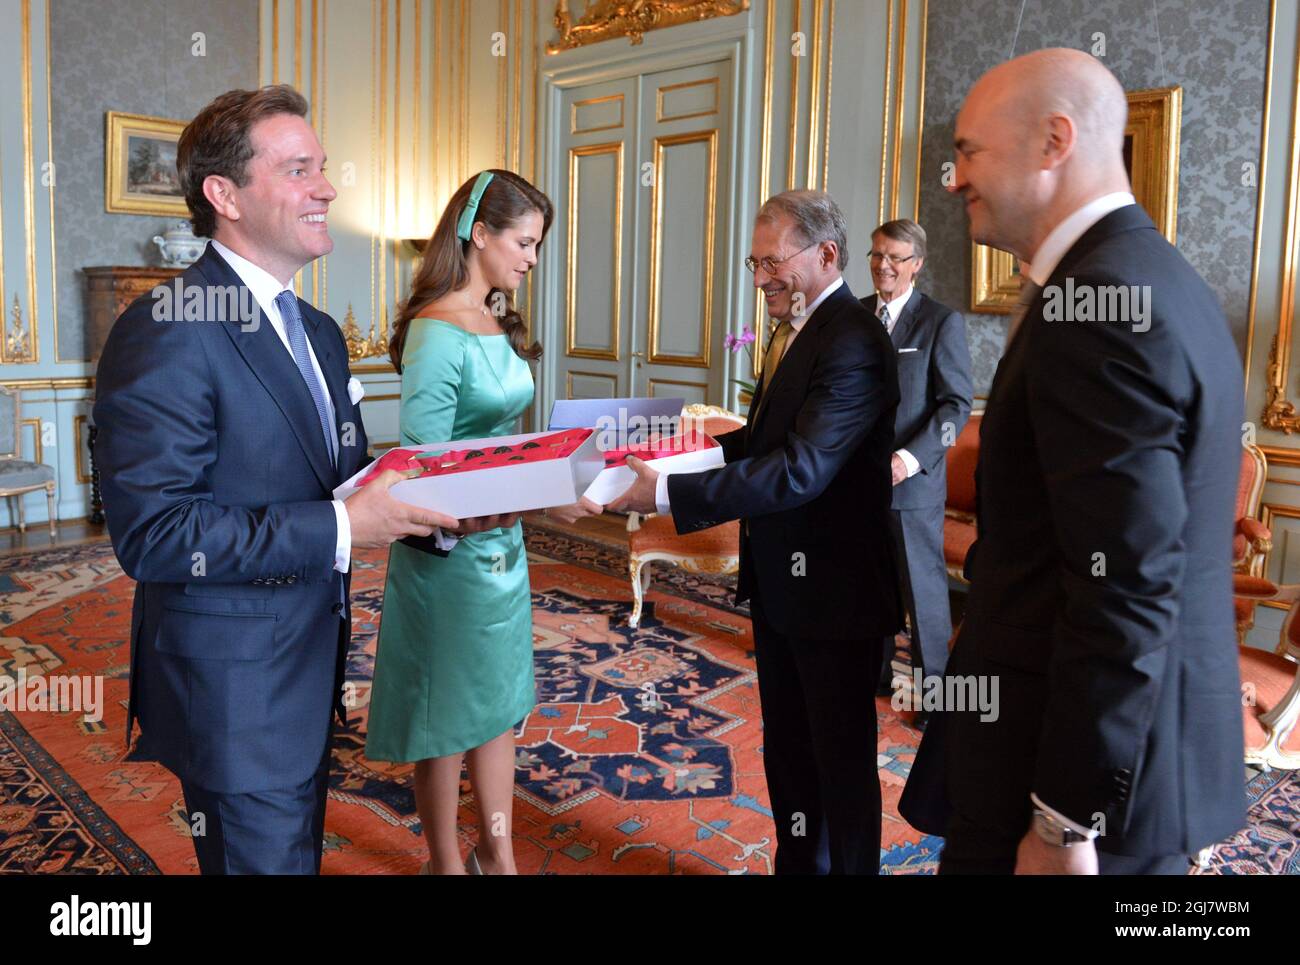 Swedish PM Fredrik Reinfeldt (R) and speaker of the Parliament Per Westerberg (2nd R) congratulate Princess Madeleine and Christopher O'Neill during the reception at the Royal Palace after the banns of marriage for Princess Madeleine and Christopher O'Neill service in the Royal Chapel in Stockholm, Sweden, May 19, 2013.     Stock Photo